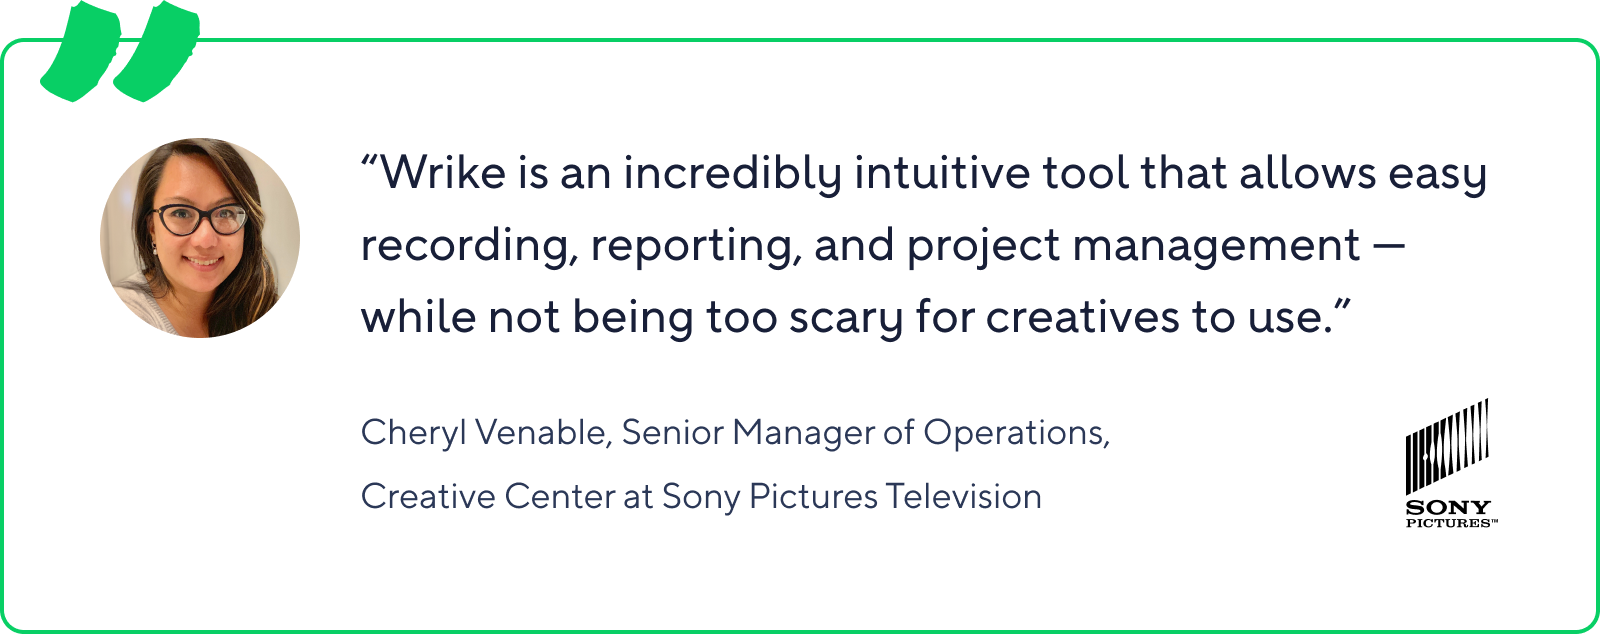 sony pictures television quote from cheryl venable